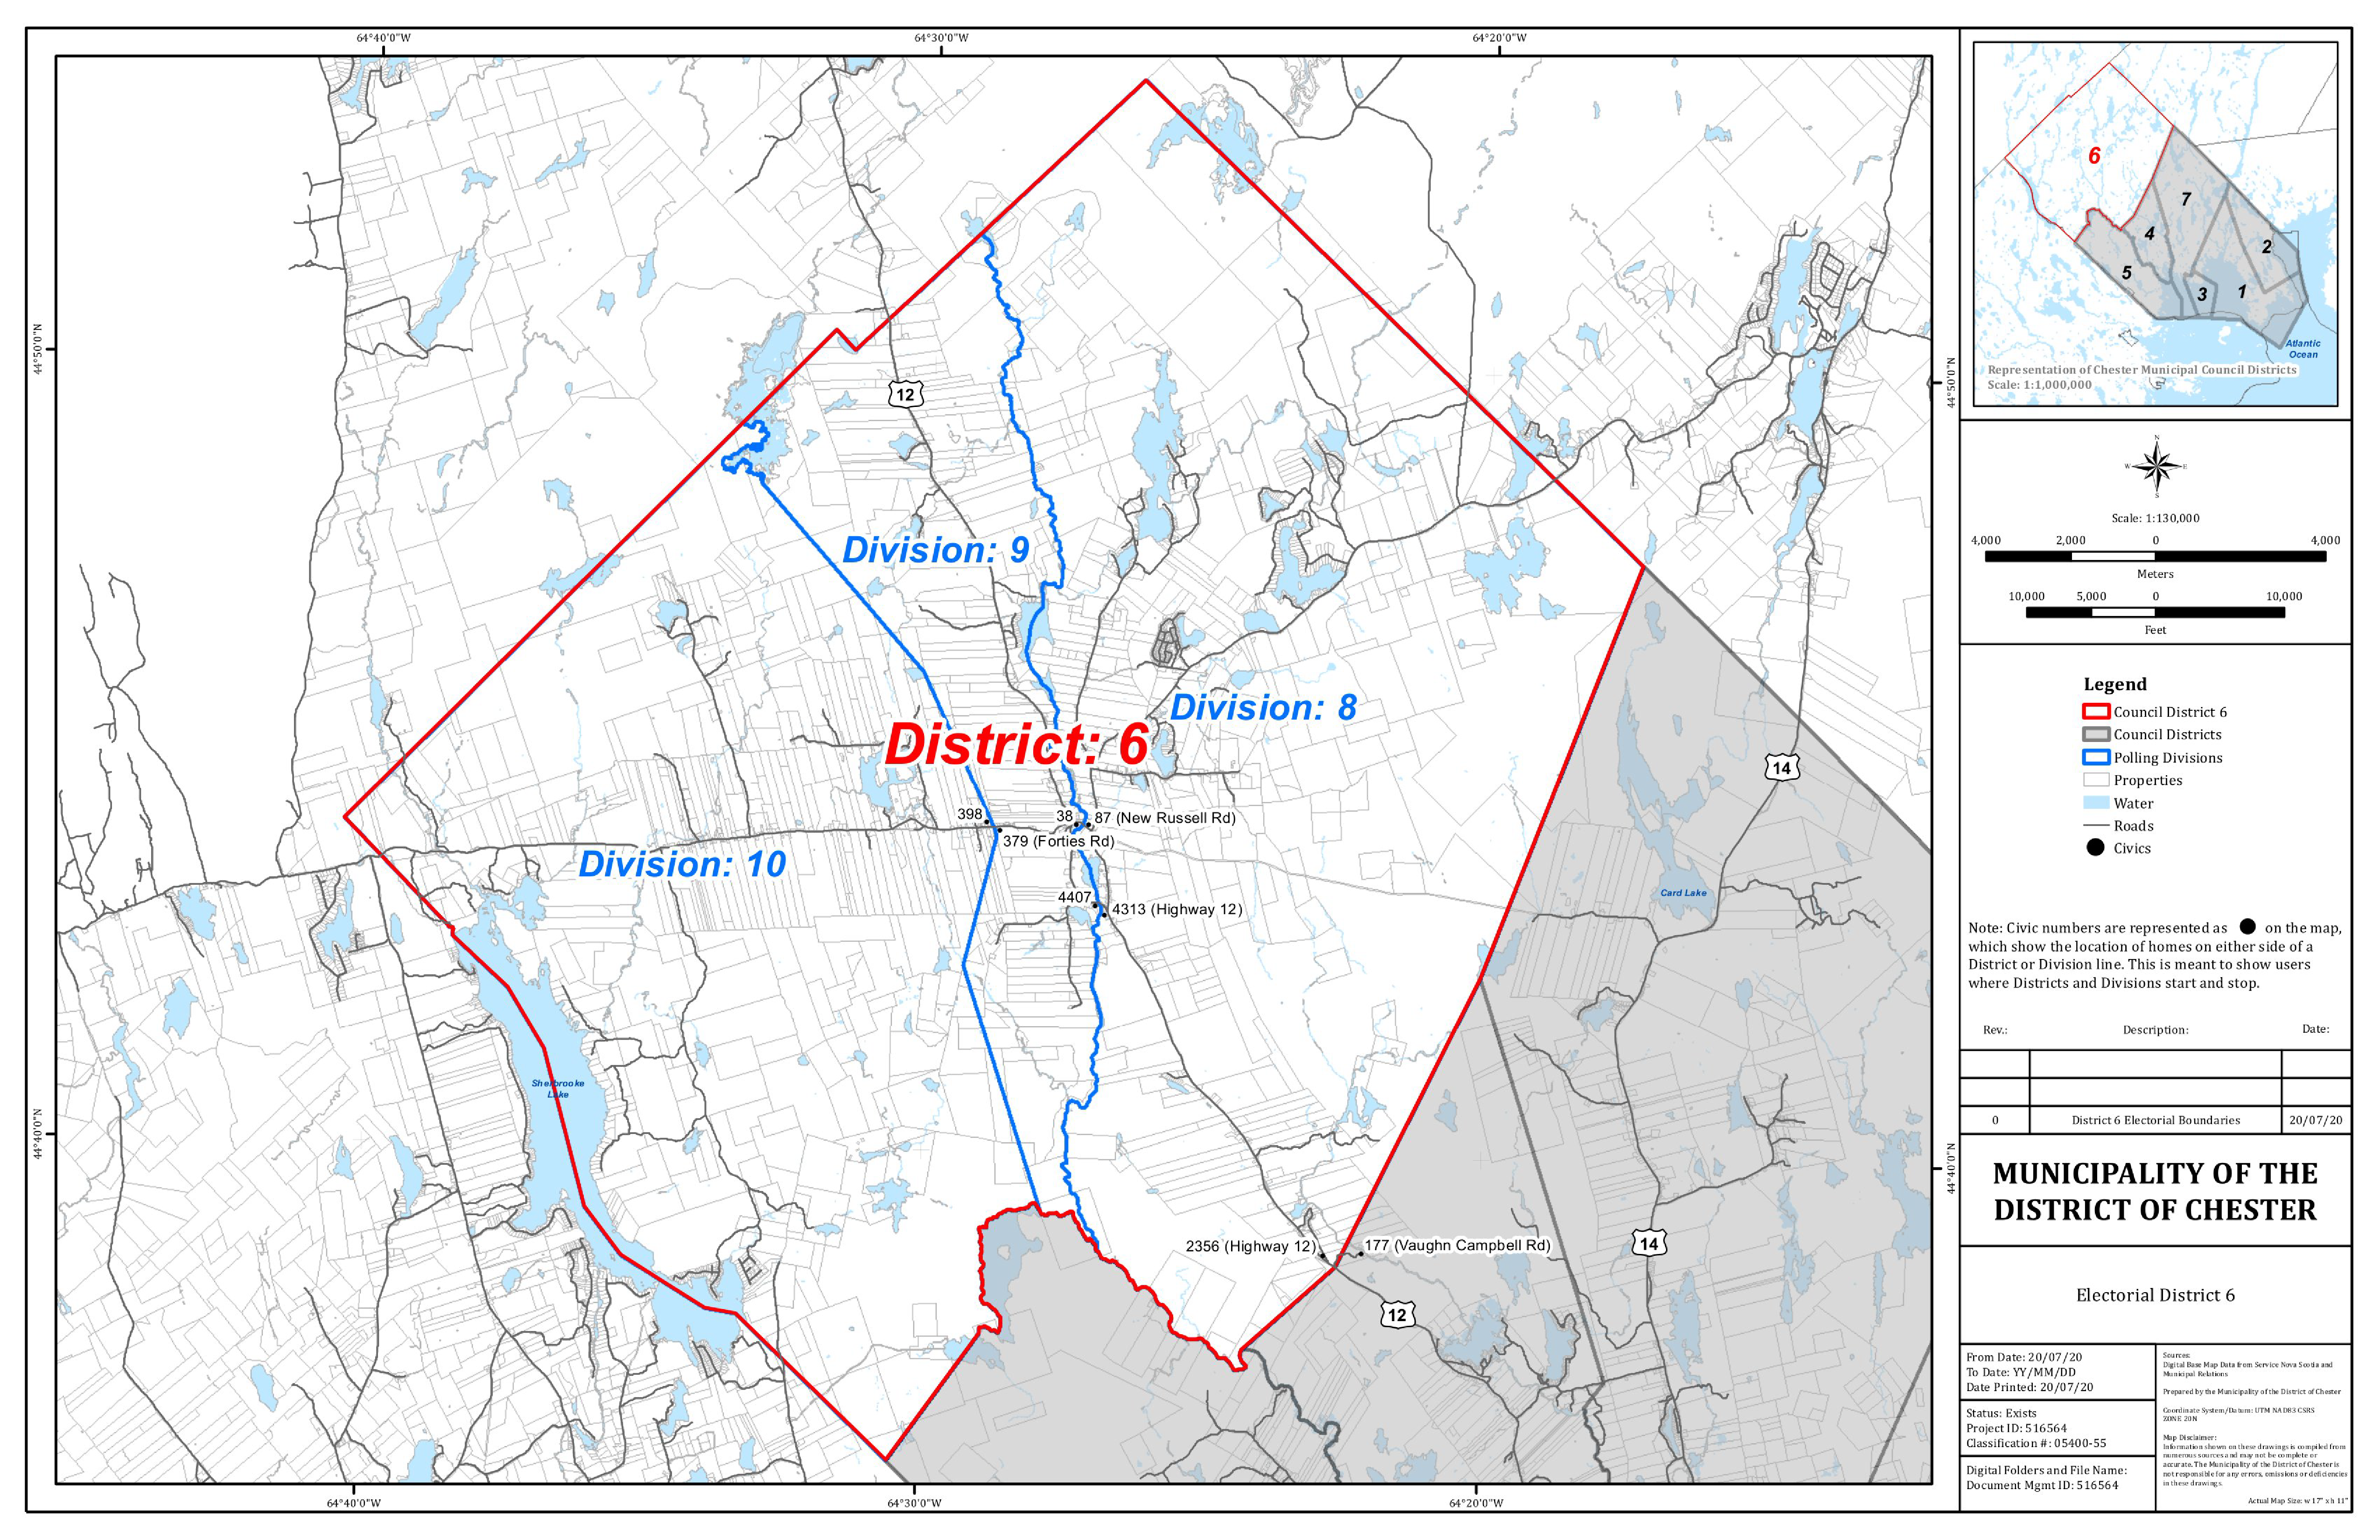 Graphic showing map of Electorial District 6 of the Municipality of the District of Chester